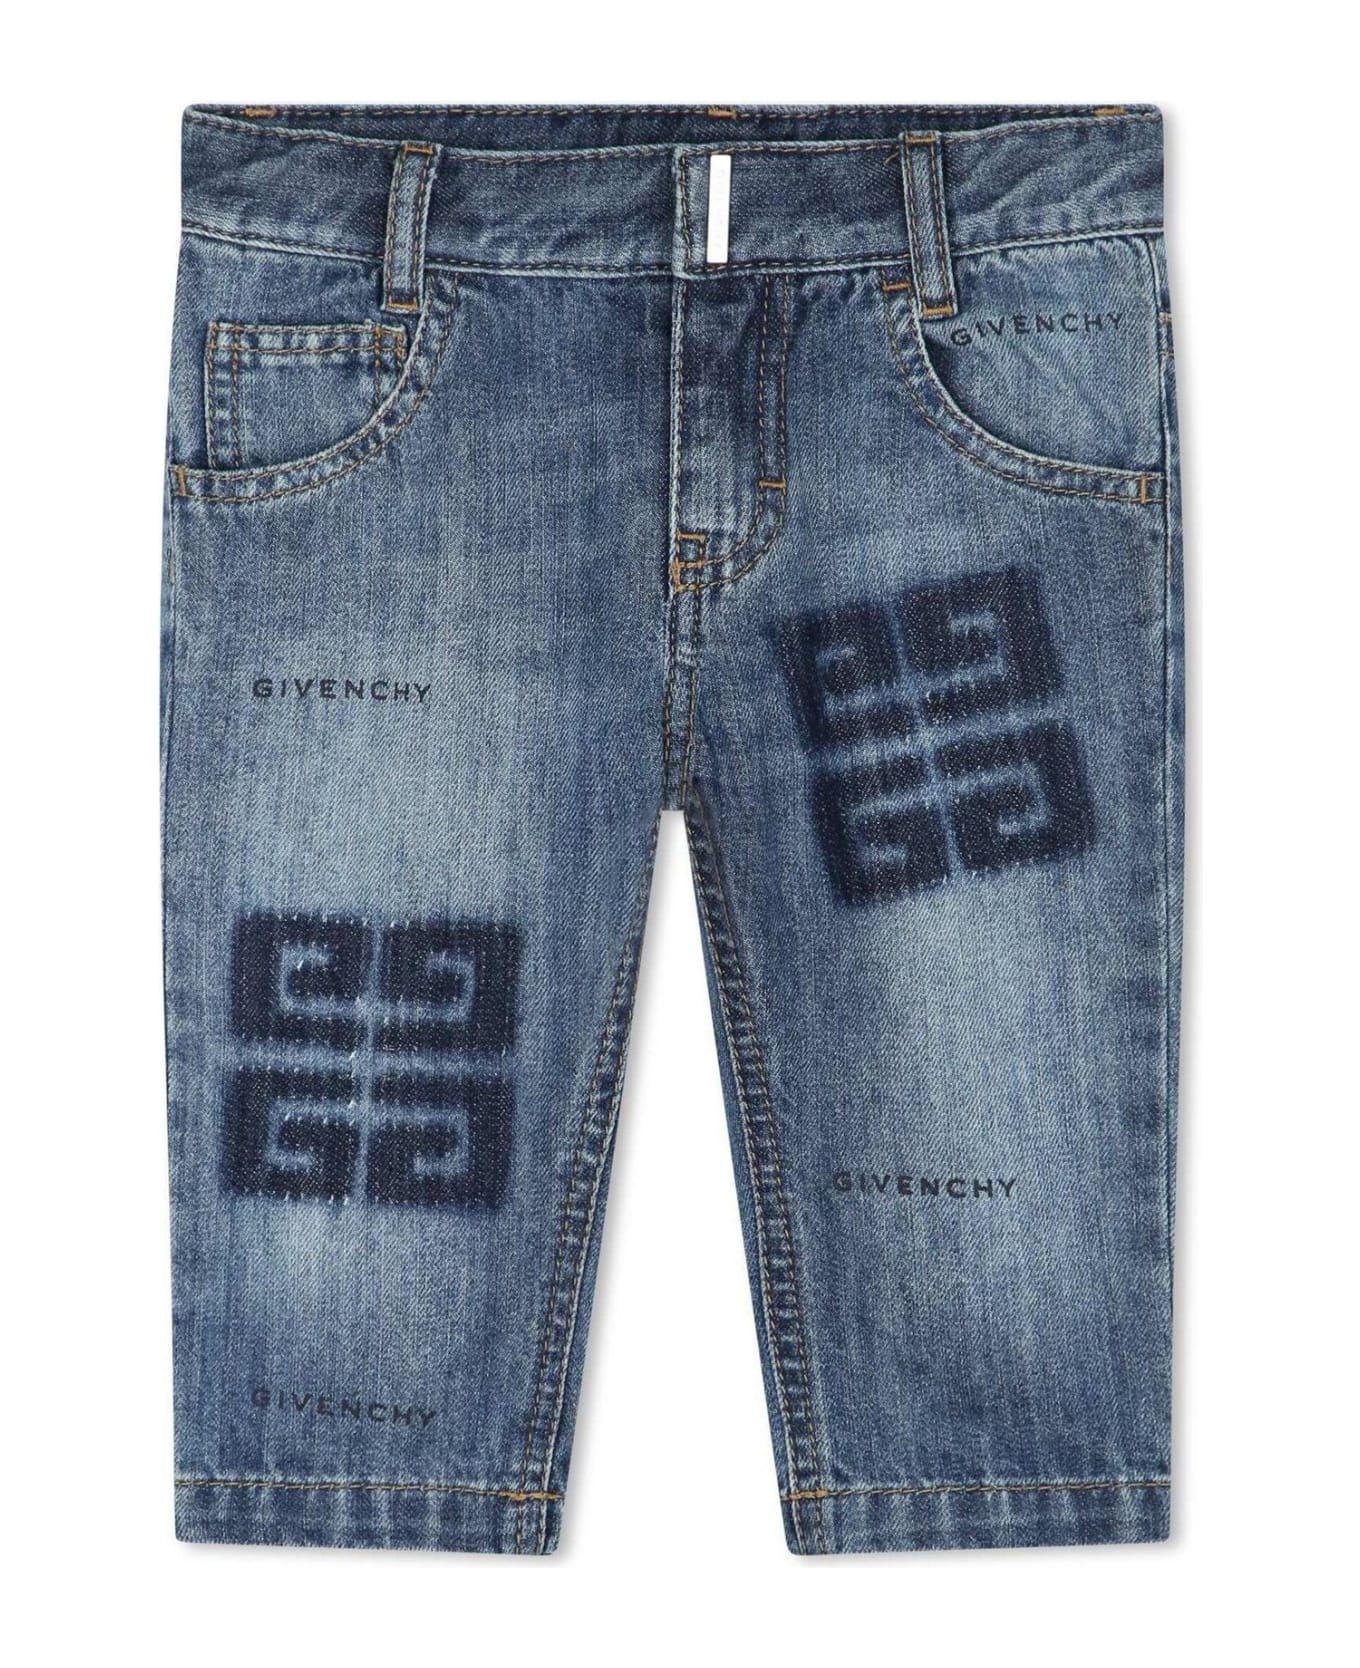 Givenchy Kids Jeans Blue - Blue ボトムス